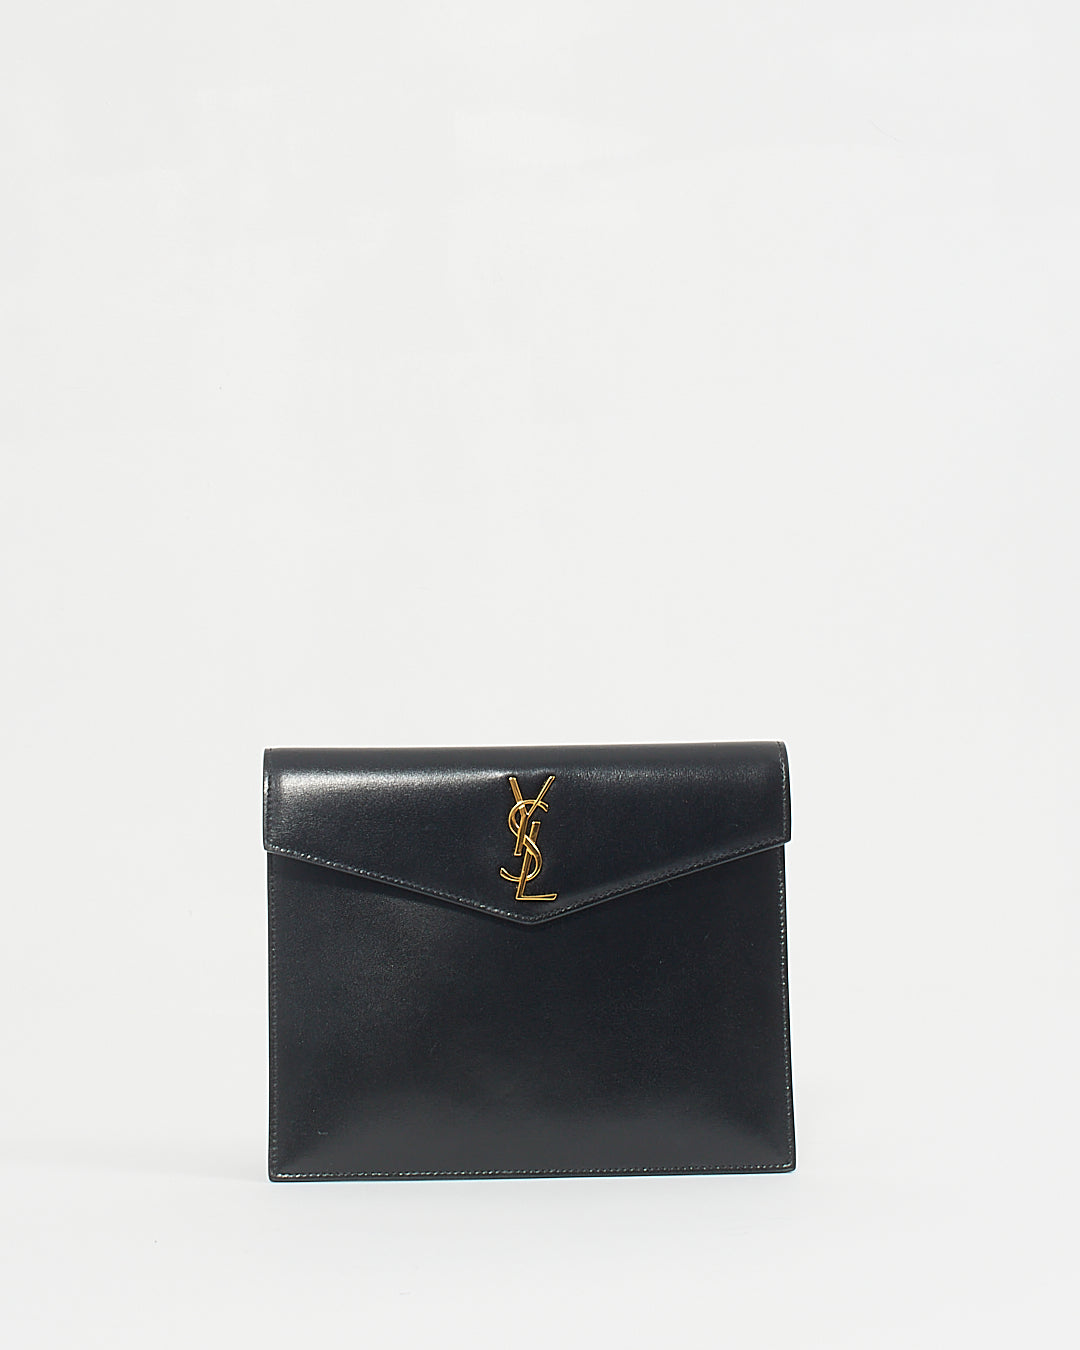 Saint Laurent Black Smooth Leather Baby Uptown Pouch Clutch